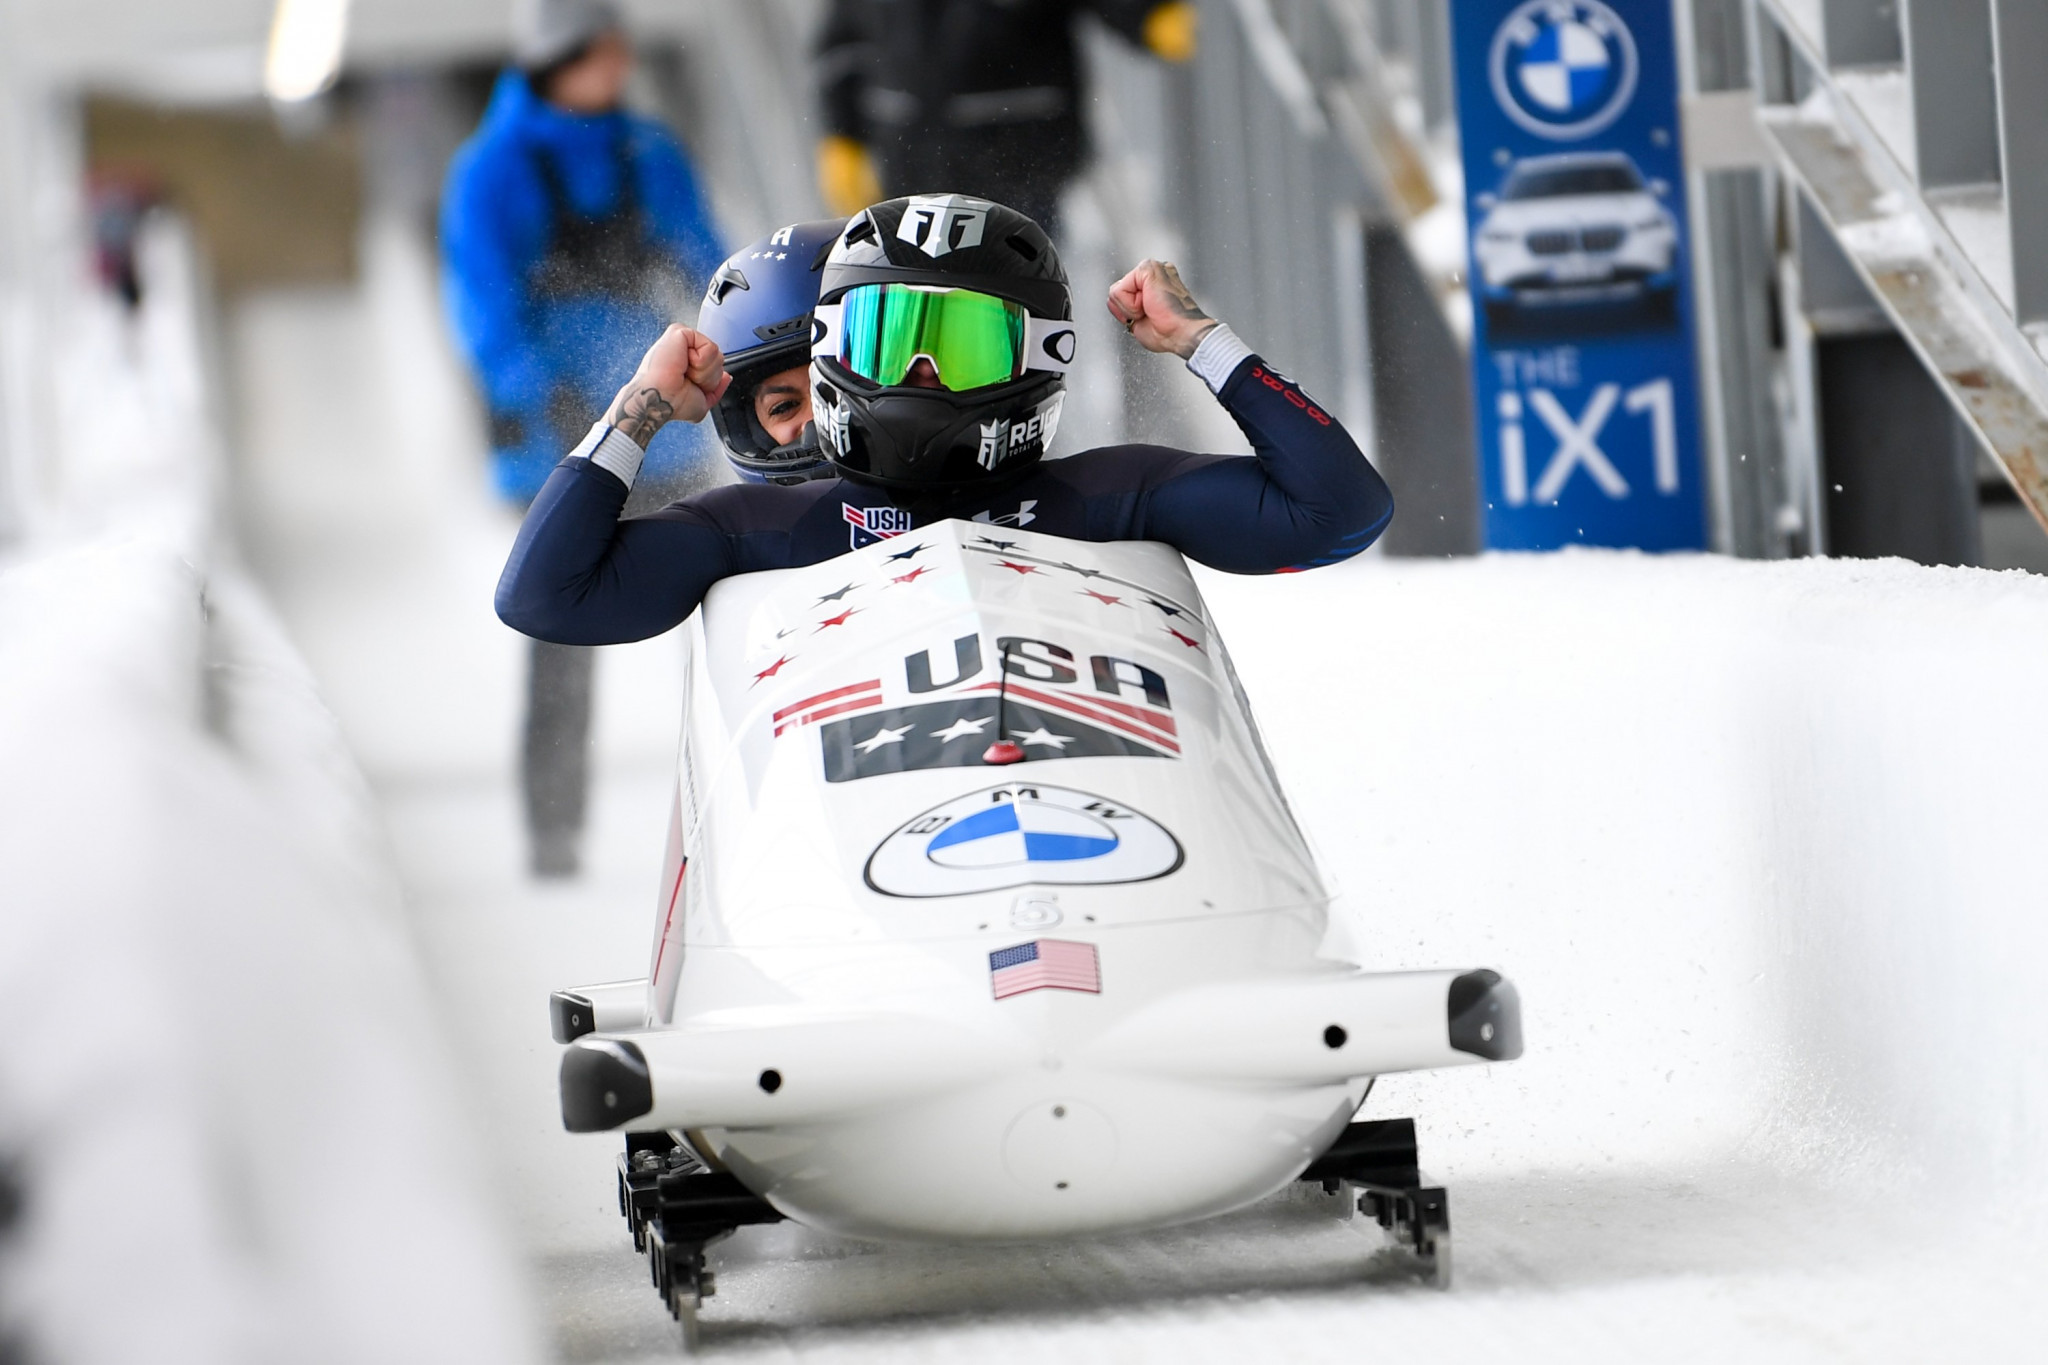 Humphries pips Olympic champion Nolte for two-woman bobsleigh gold in Lake Placid 